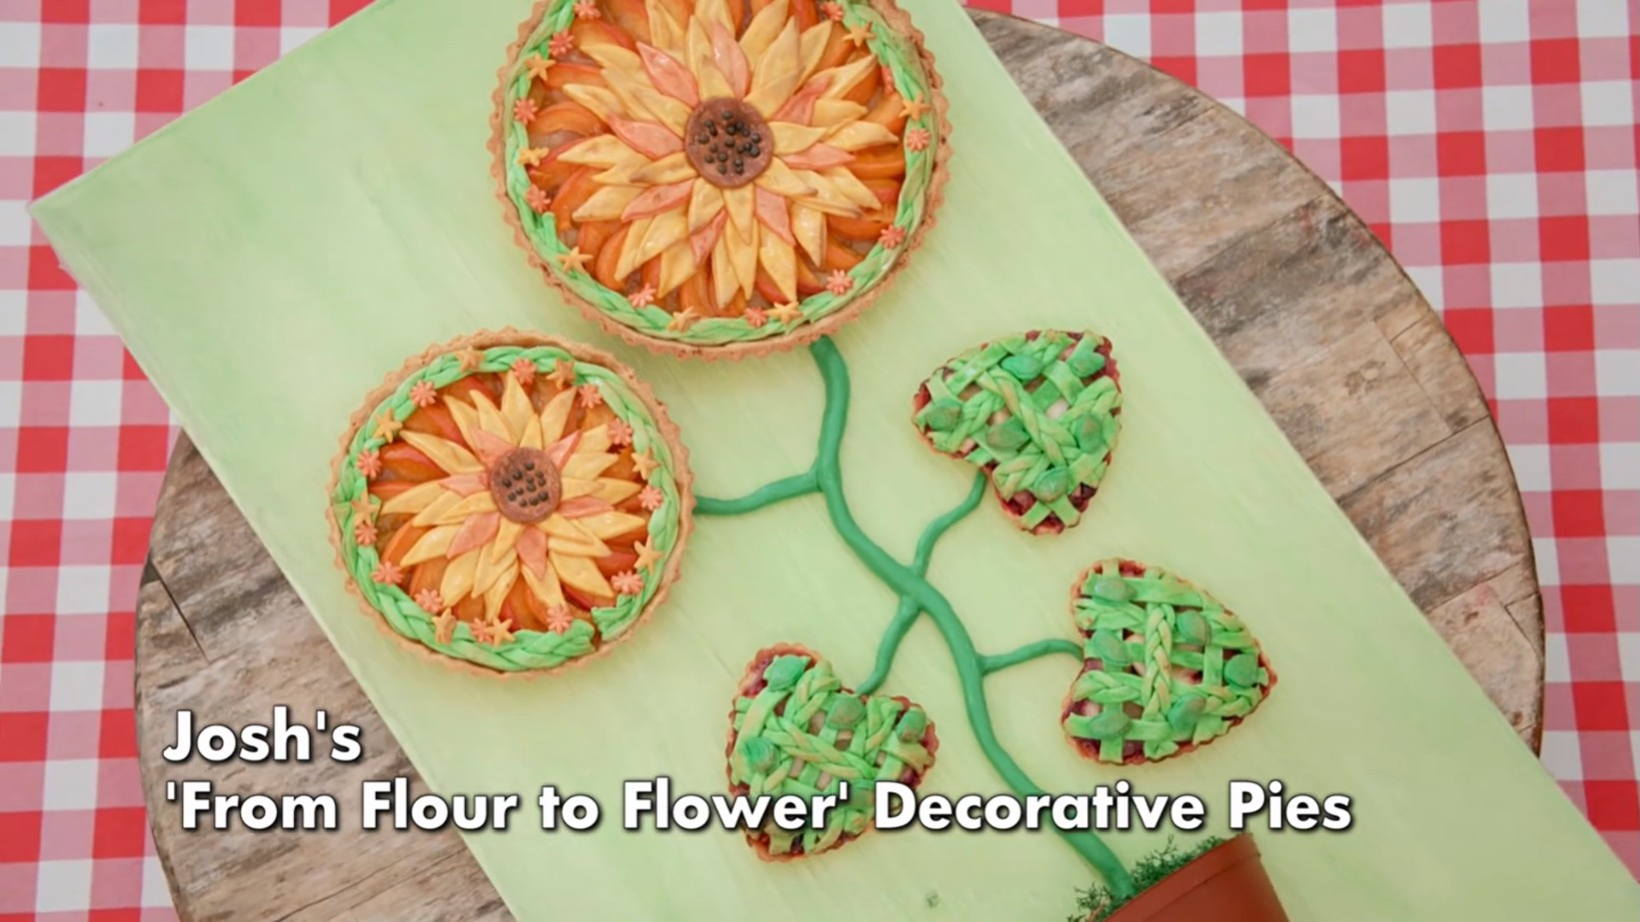  Josh's From Flour to Flower Showstopper from 'The Great British Baking Show' Season 14's Pastry Week